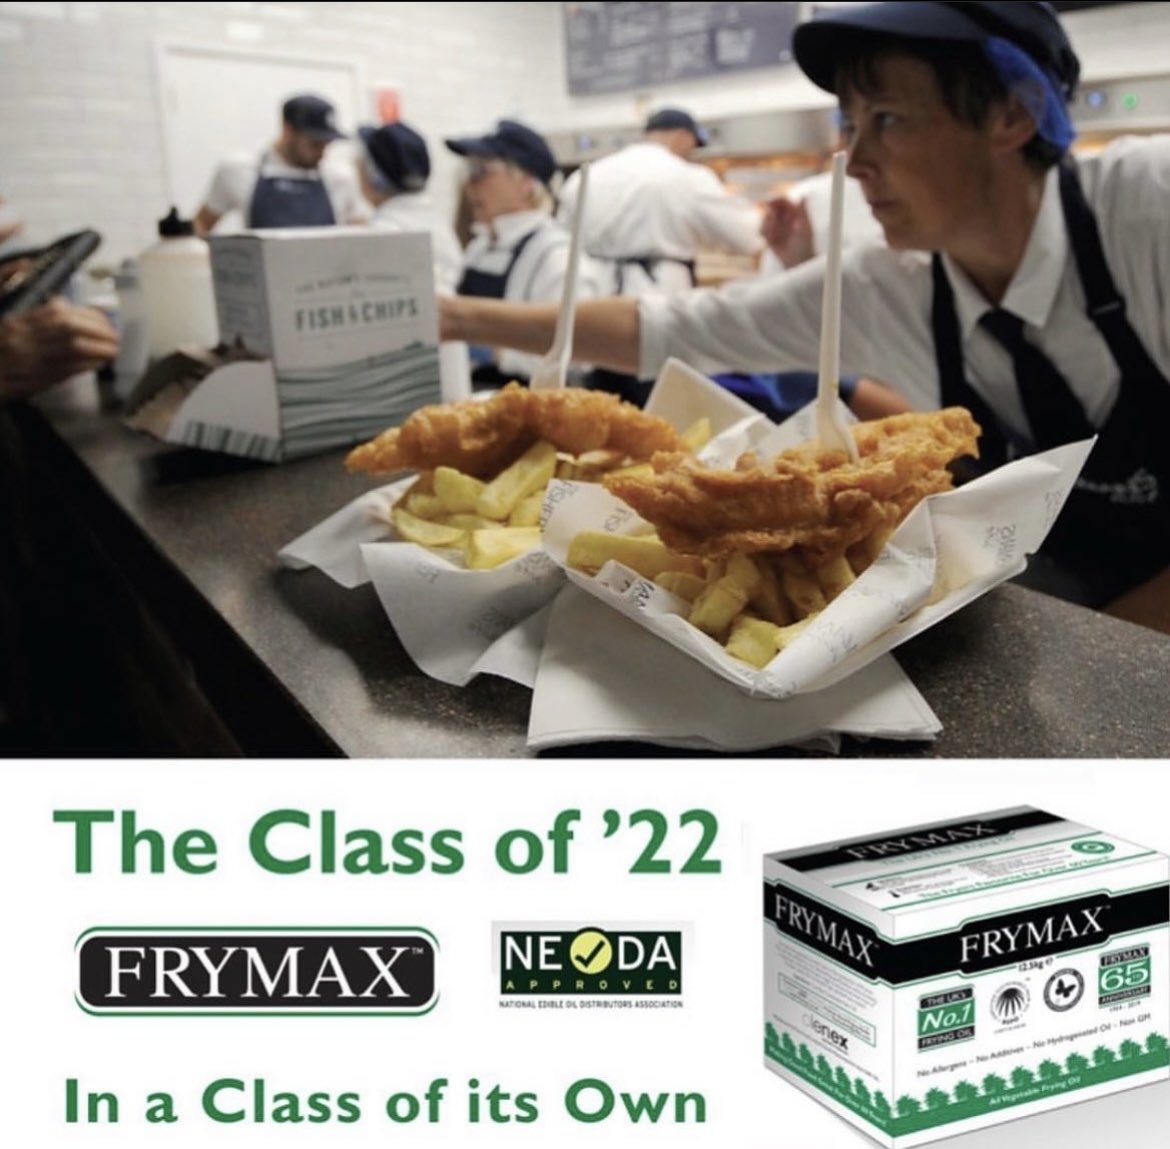 Frymax
“A class of its own”
The Class of 22 number around 10,500 Fish and Chip shops in the UK.

Click here >> library.myebook.com/FryMag/fry-feb…

#oils #oil #cooking #cookingoil #fats #fatsandoils #takeaway #fishandchipslondon #fishandchips #restaurant #takeawayfood #takeawaychef #chef